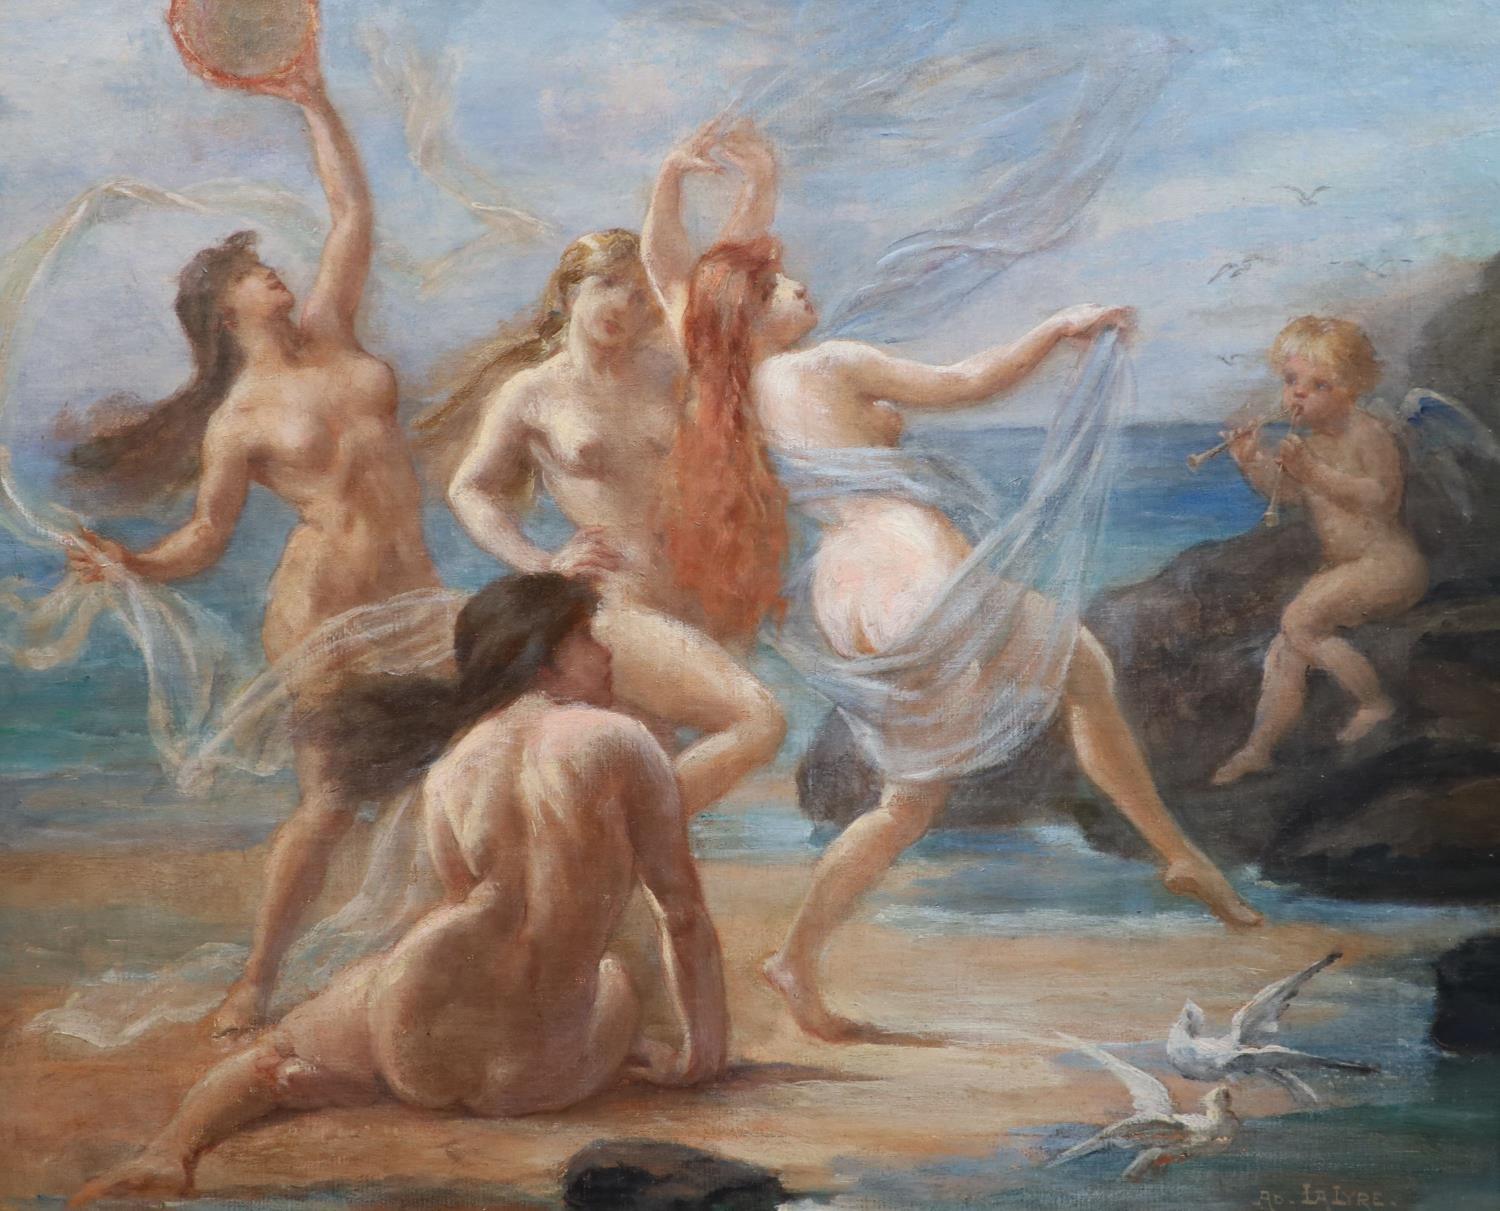 Adolphe Lalyre  Nude Painting - Fine Antique French Oil Painting Sirens and Cupid Dancing along the Seashore